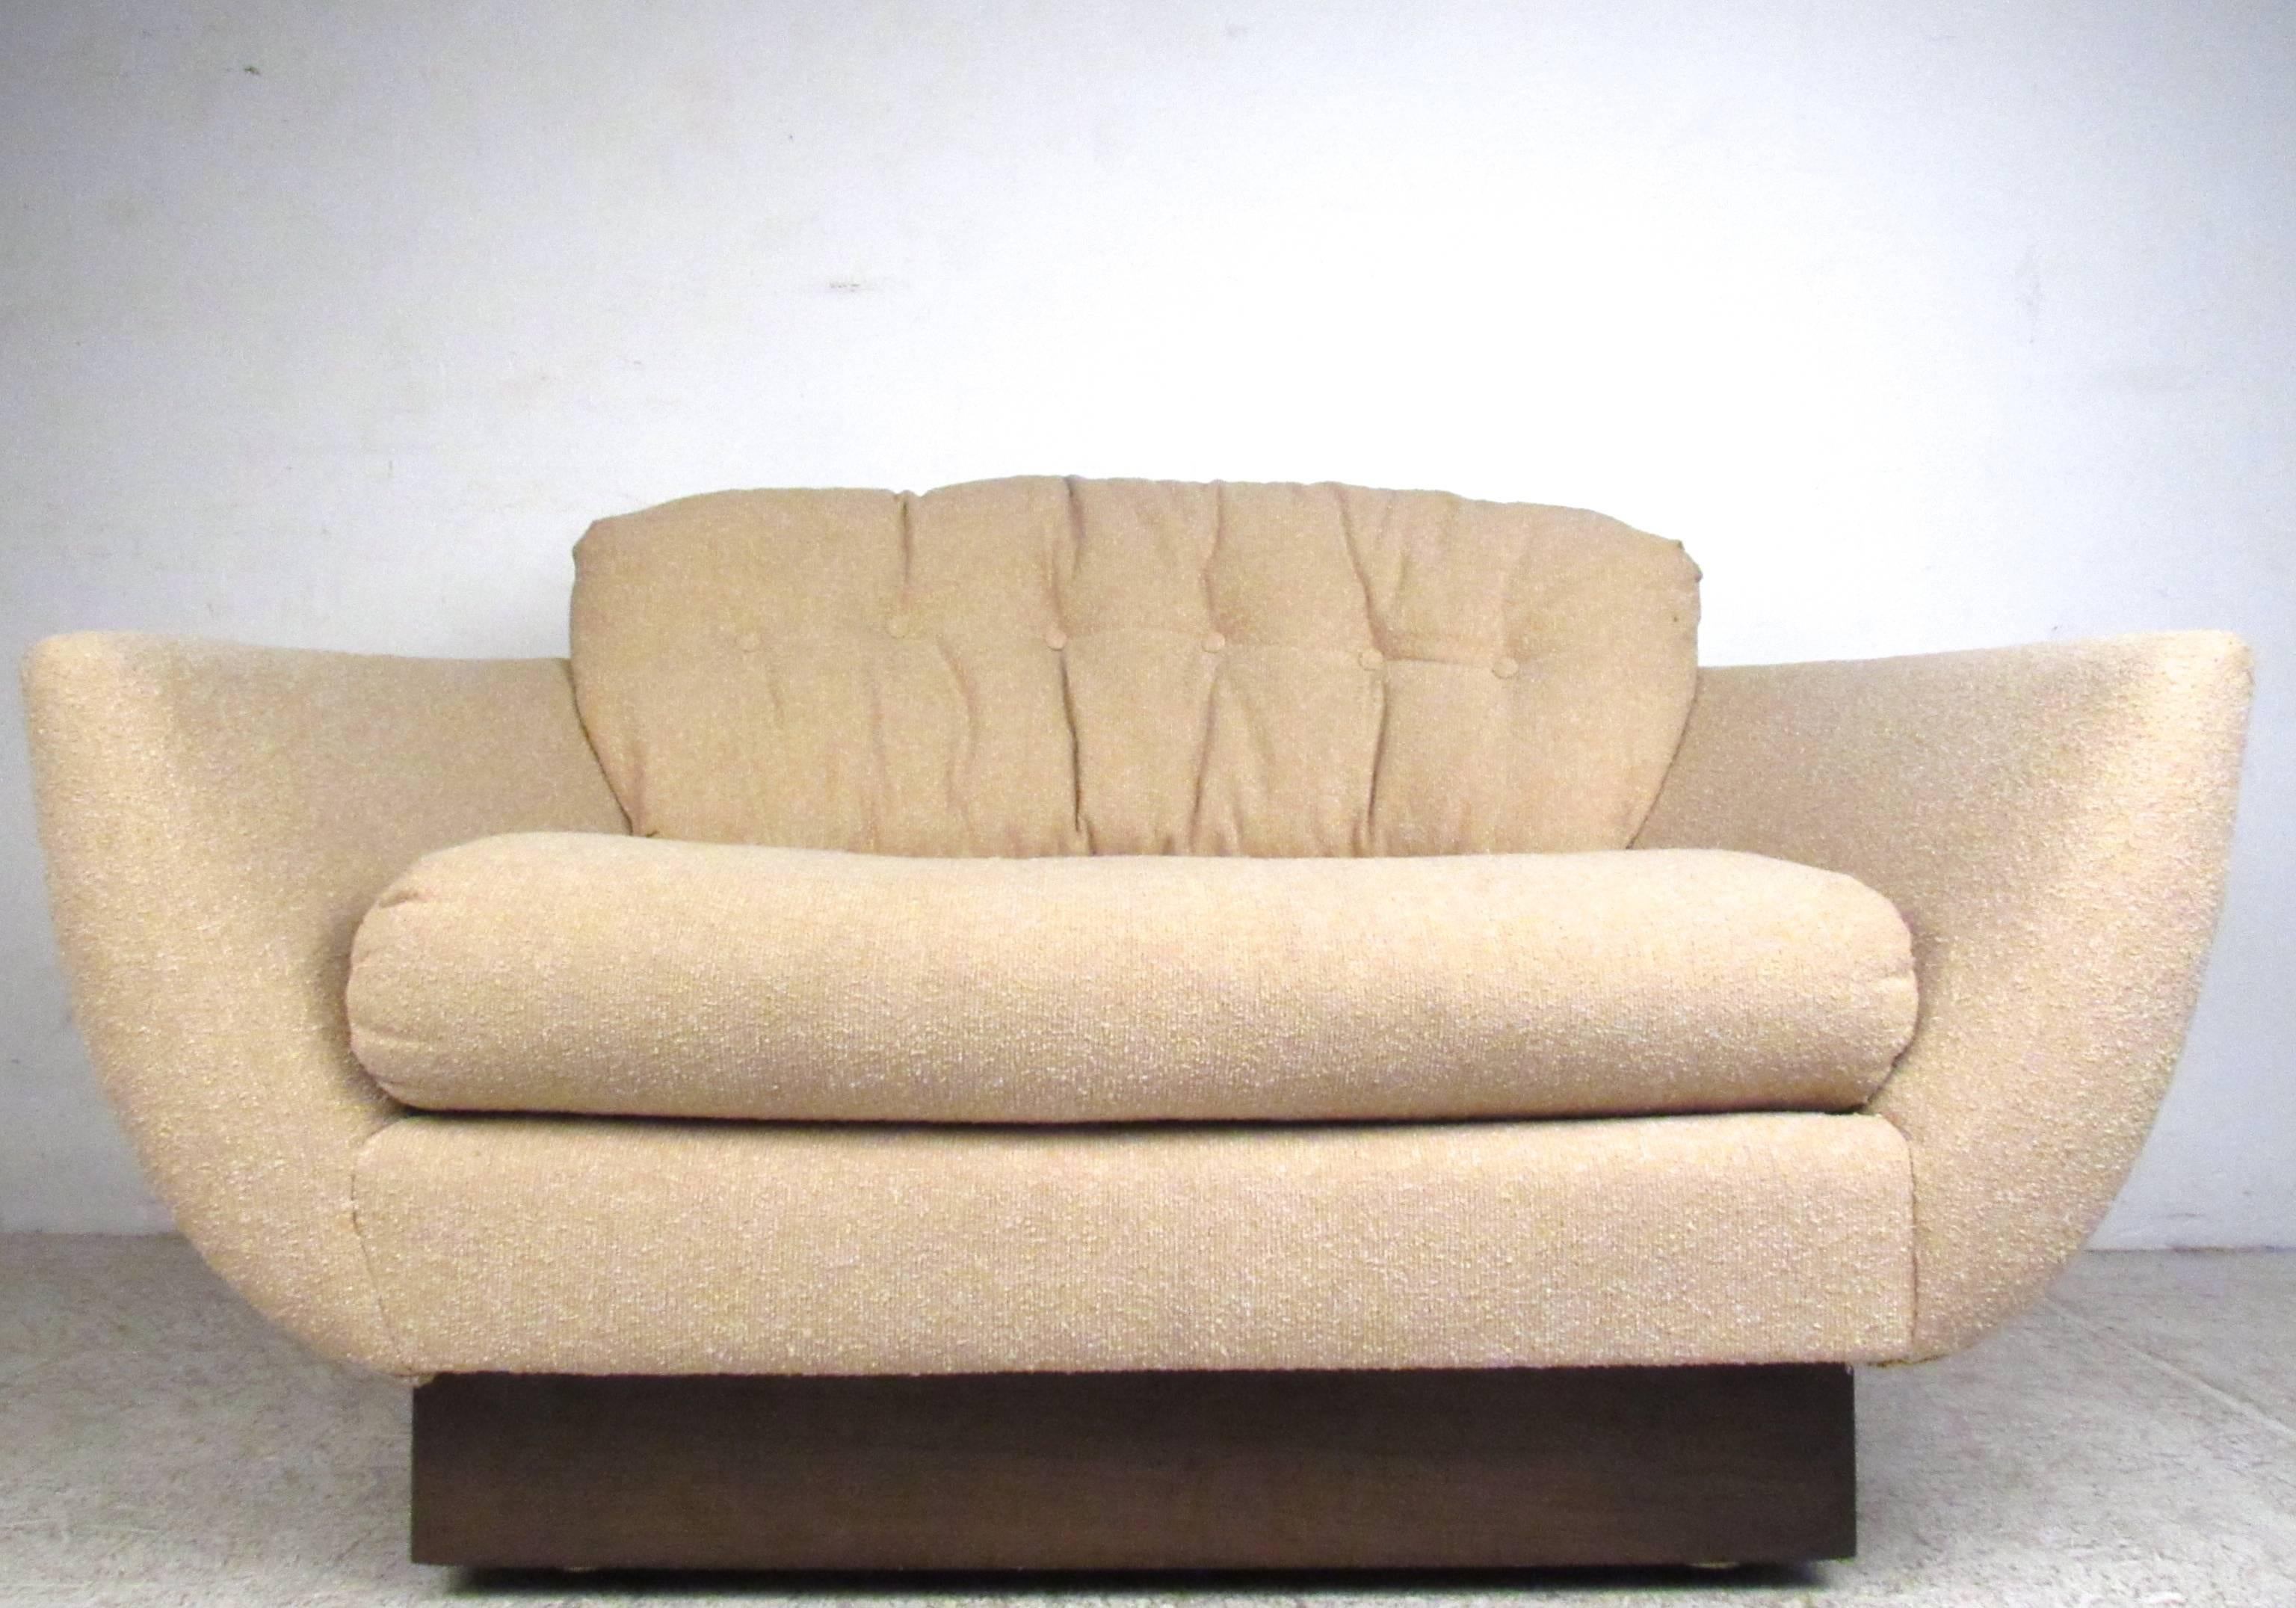 This loveseat style lounge chair features a wide sculpted seat with comfortable upholstery and tufted cushion. Wood trim base adds charm to it's Mid-Century style, please confirm item location (NY or NJ).